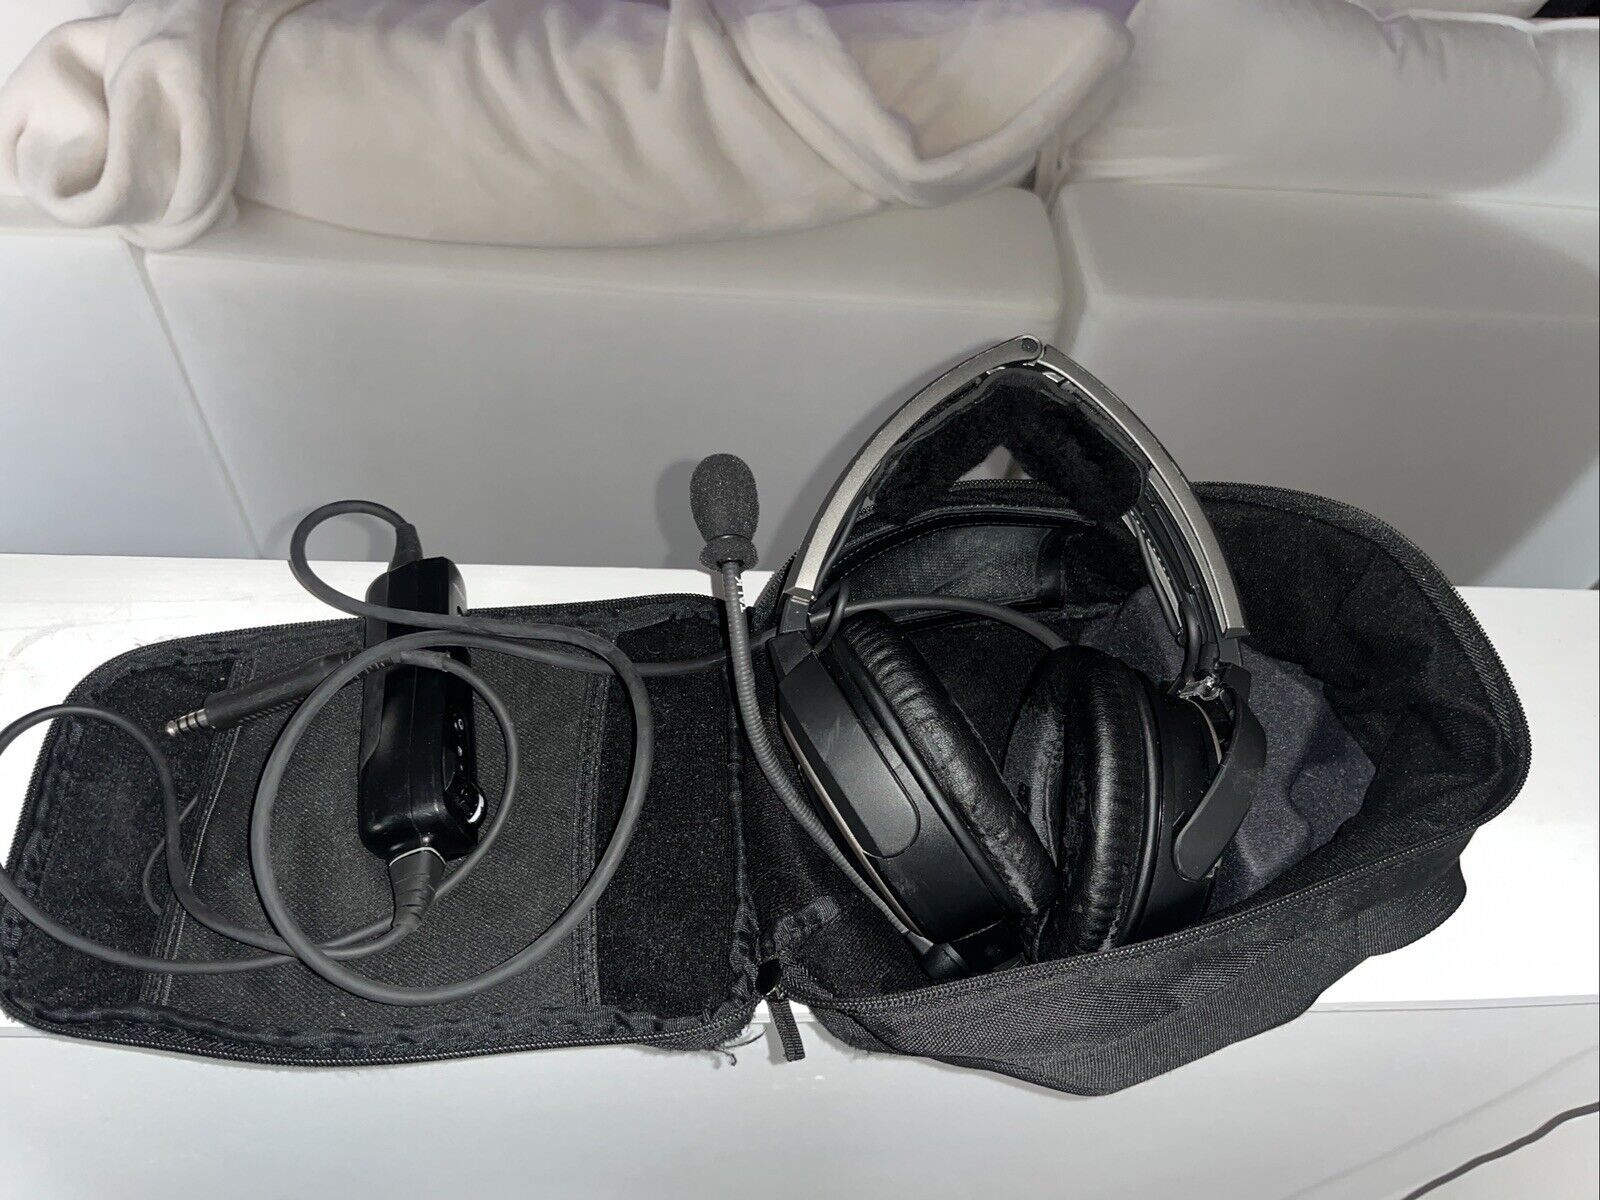 Bose A20 Aviation Headset with - Dual Plug Cable (blk) w/Carry Bag